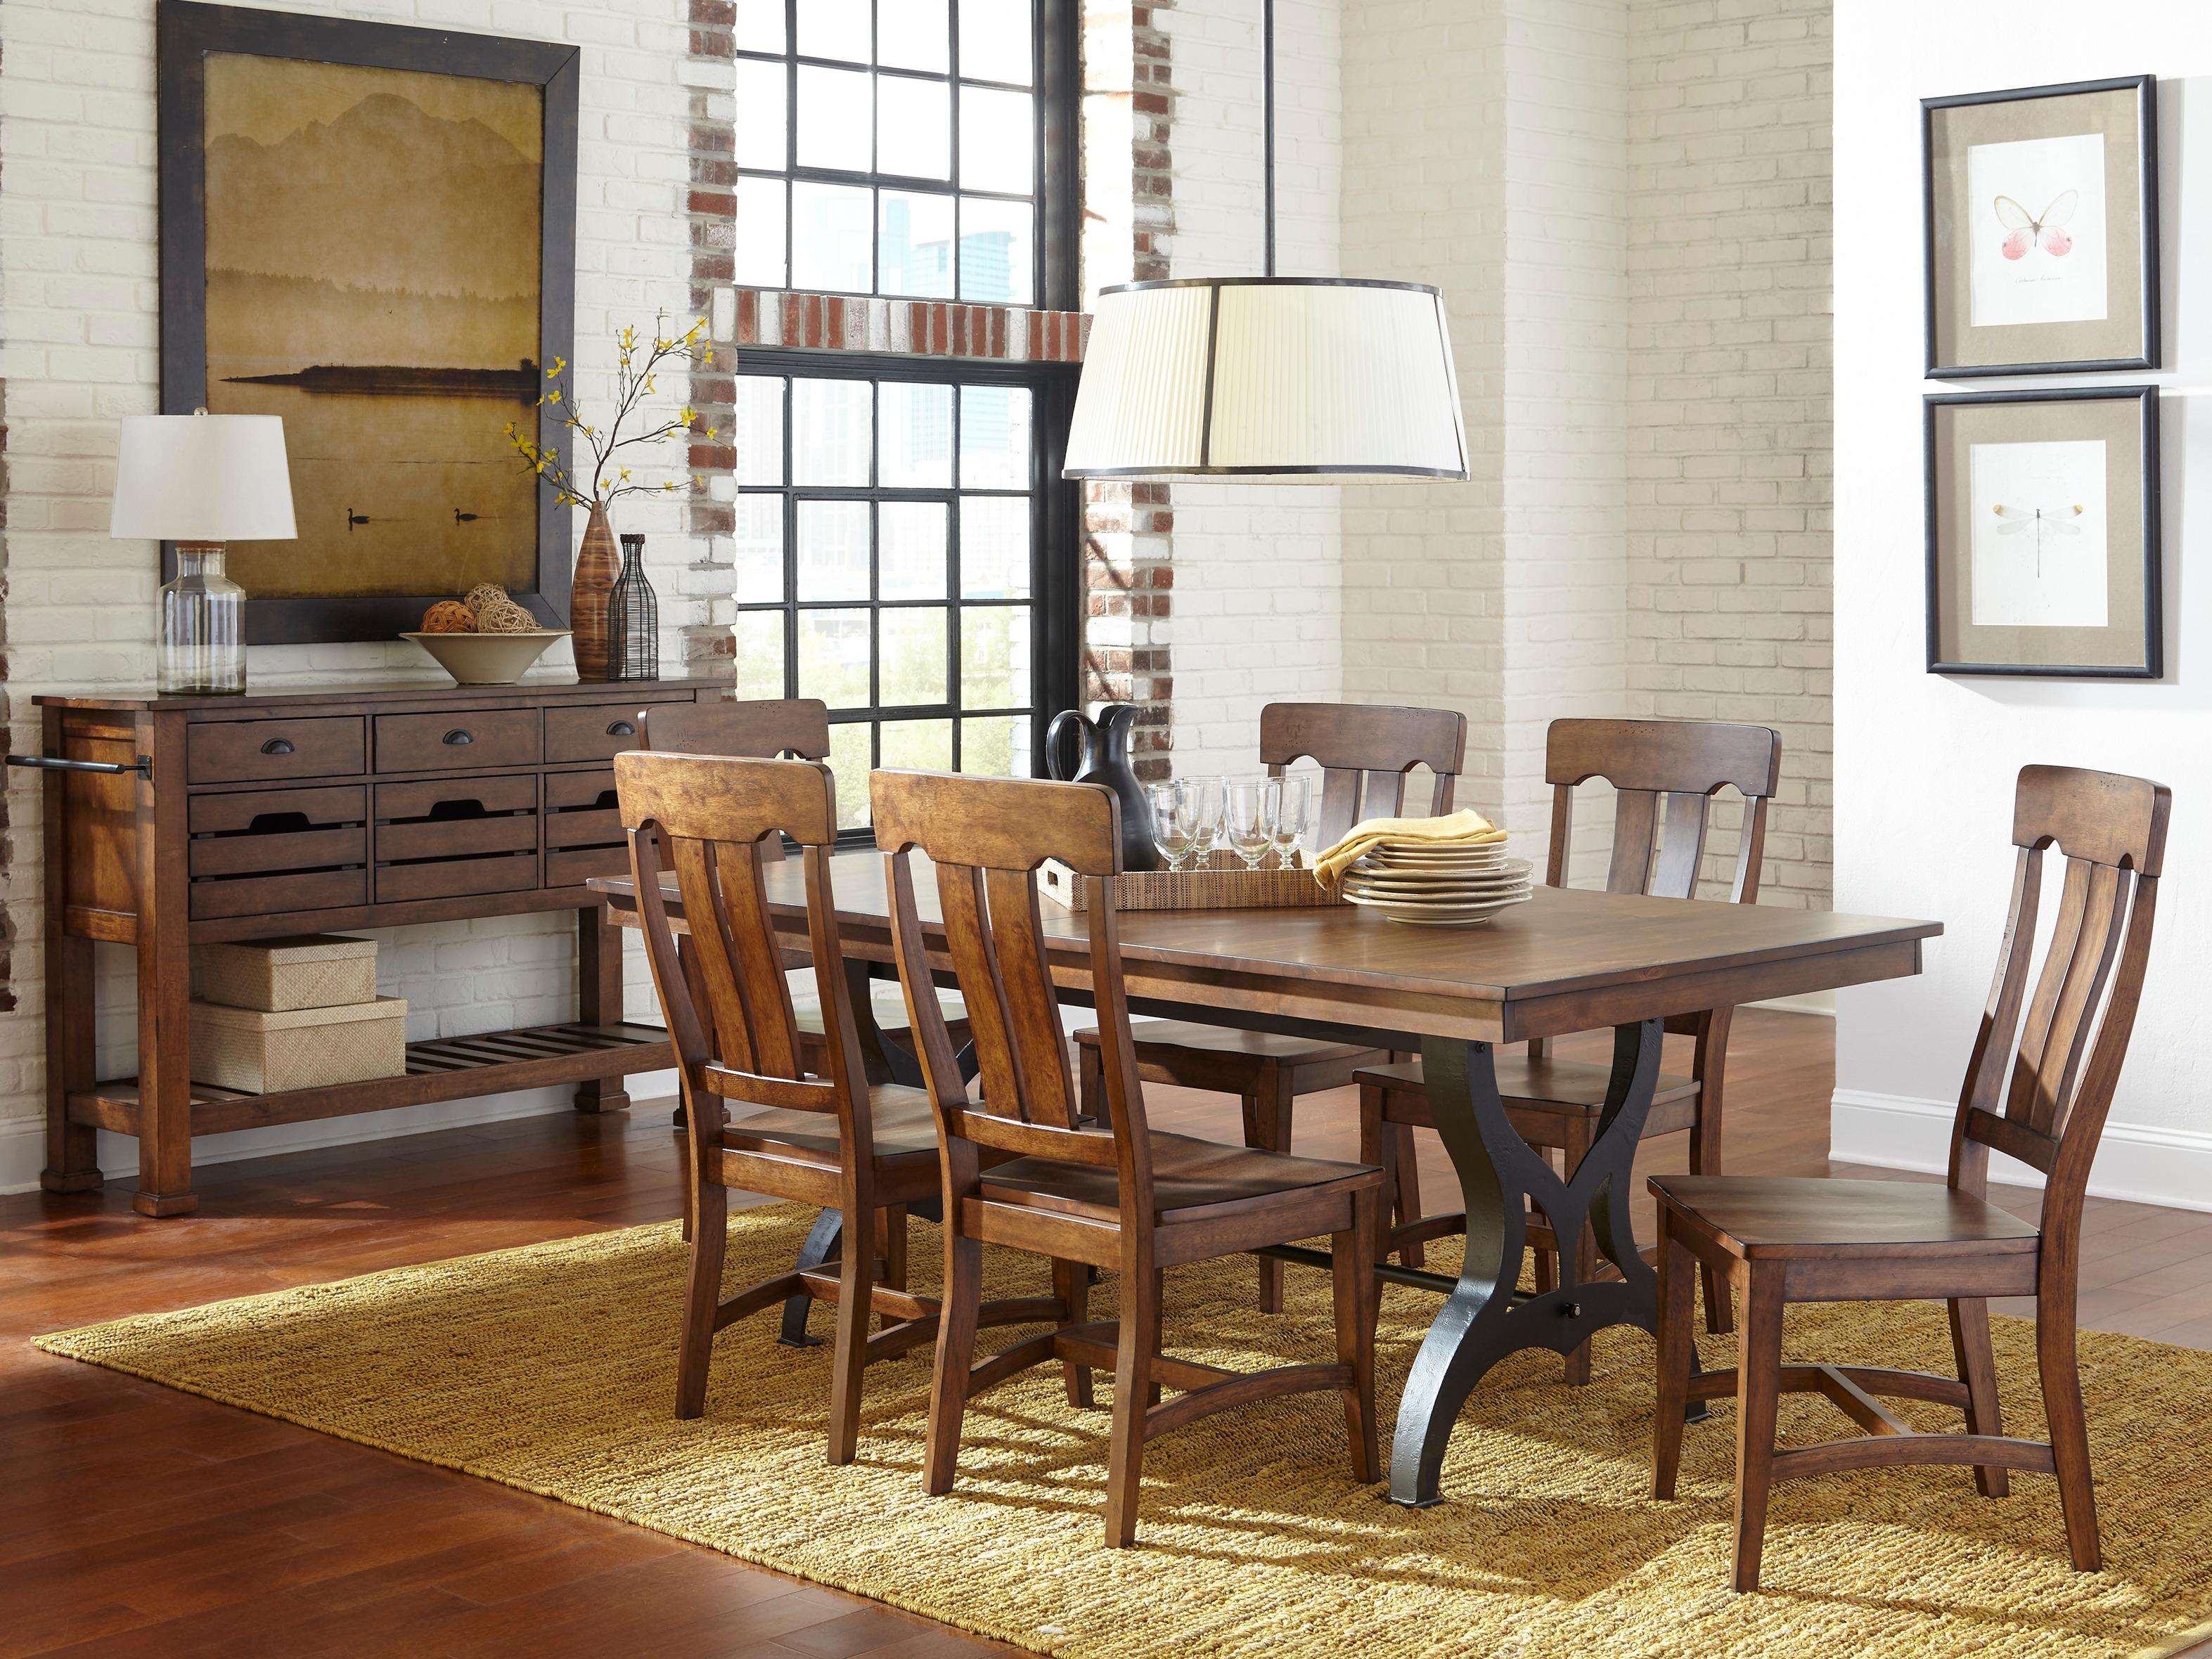 This industrial chic dining set is really turning heads in our showroom. Stop in and see it for yourself!